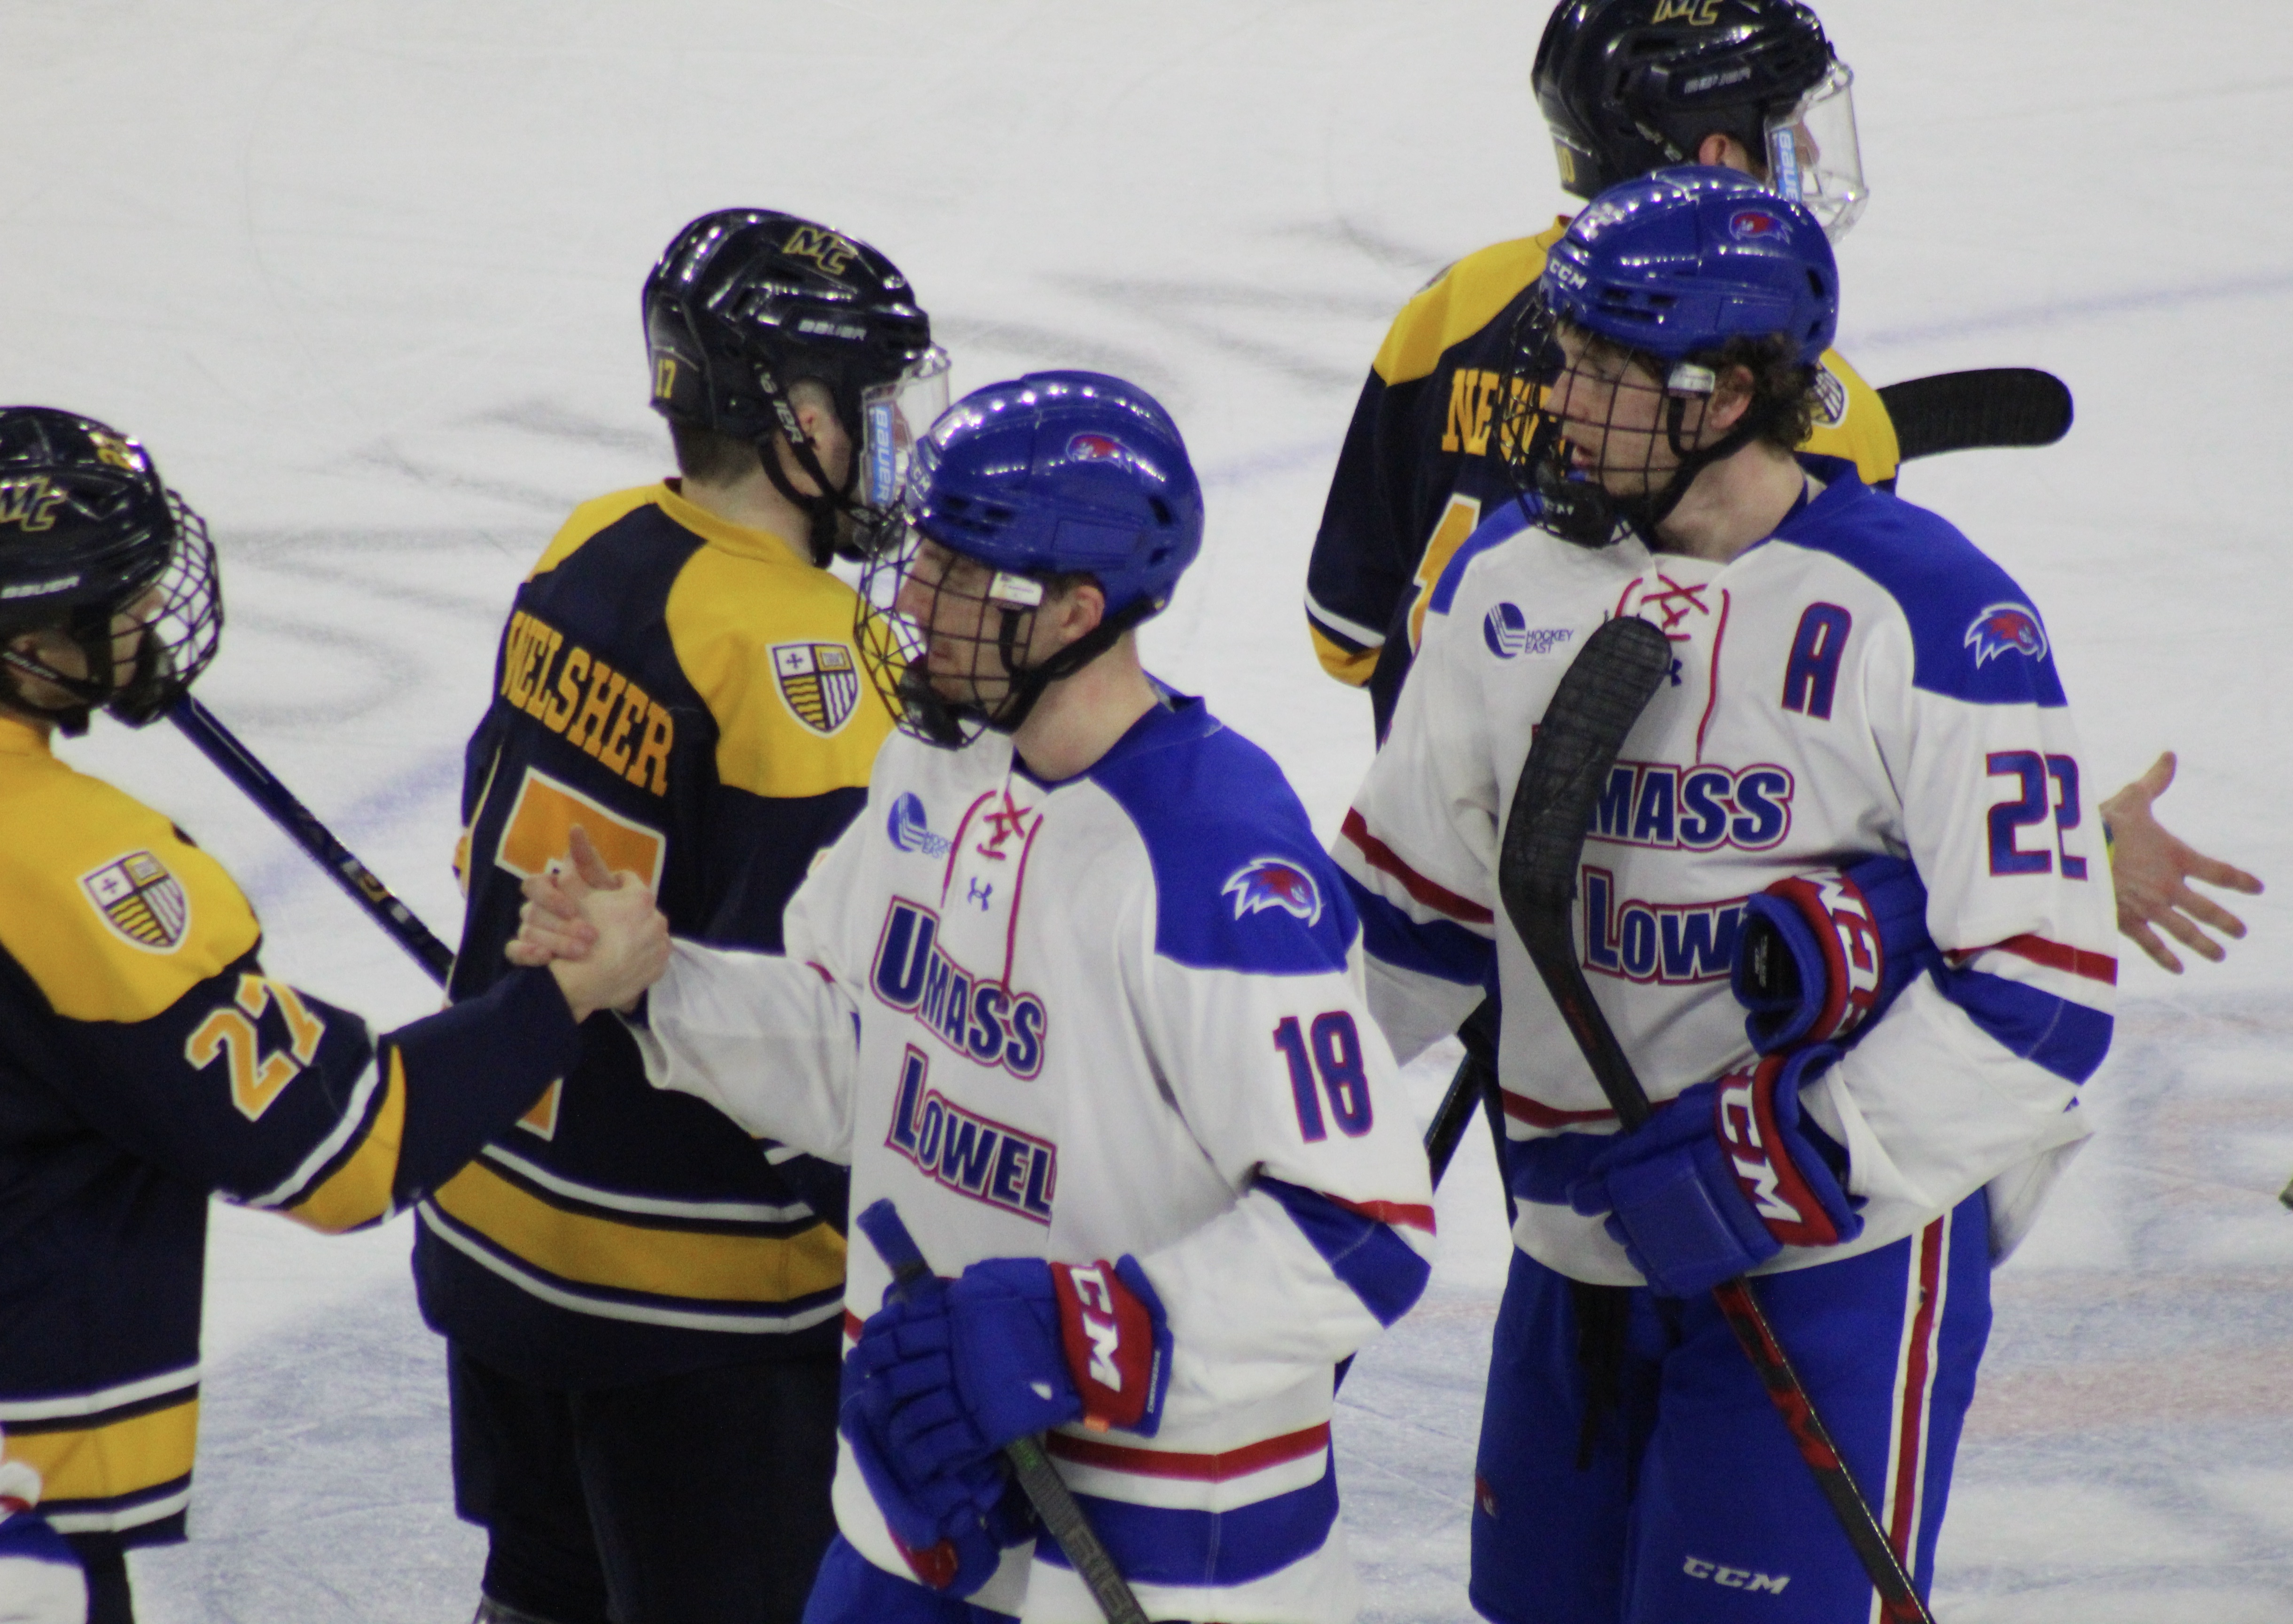 River Hawks Advance with 7-2 Win